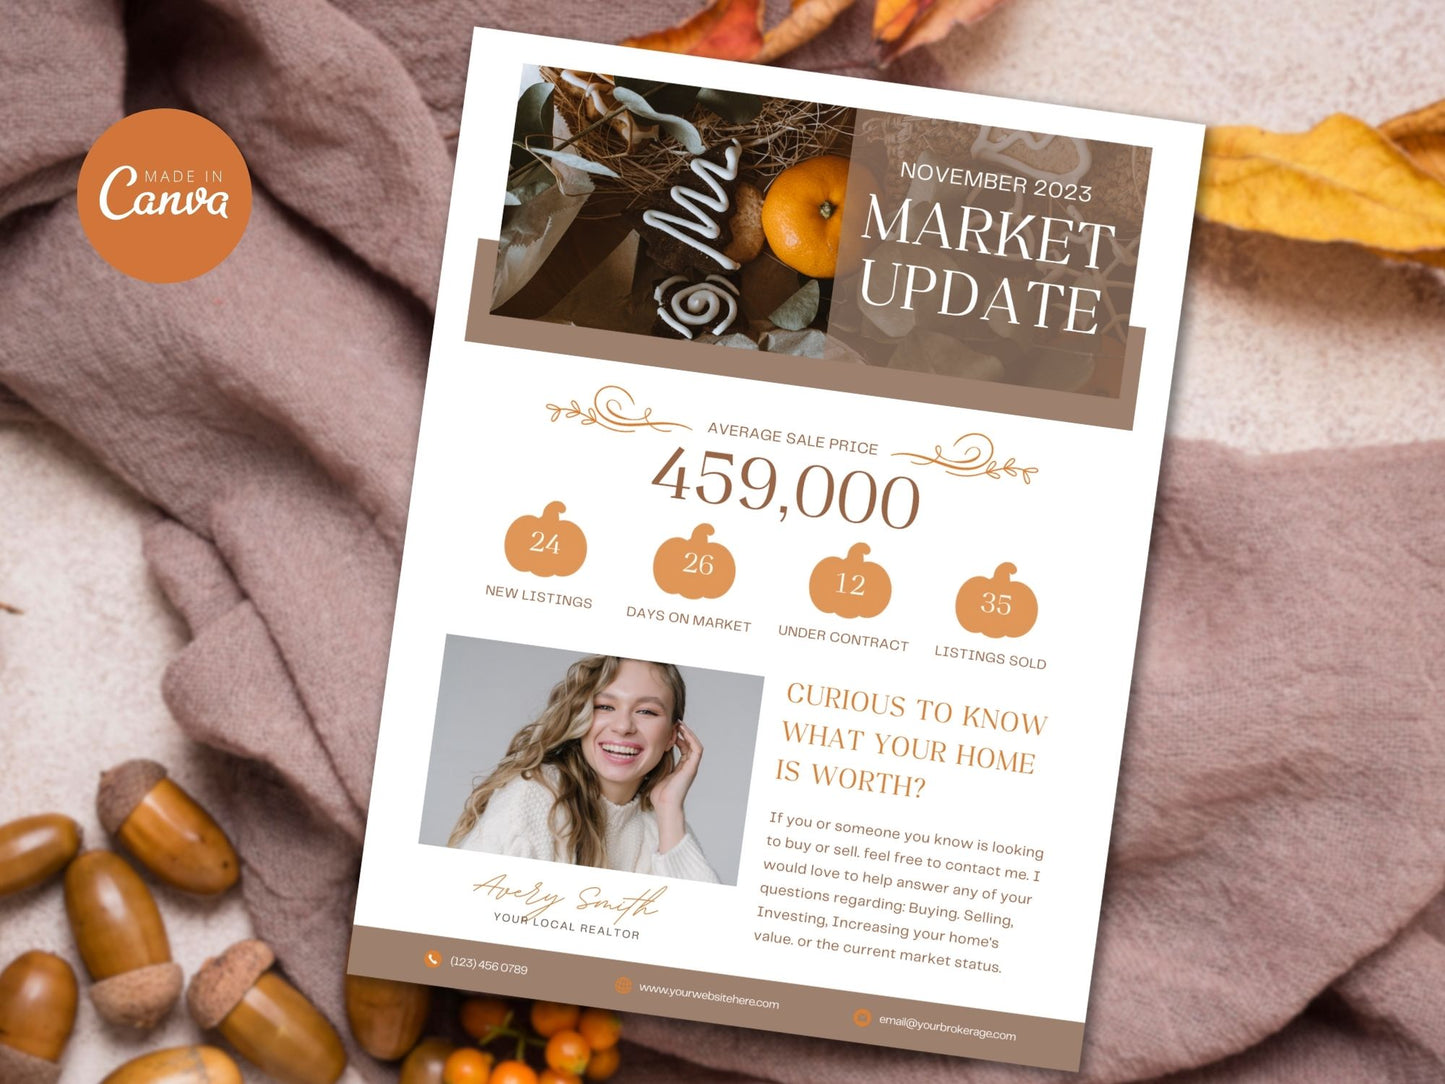 Real Estate Fall Market Update Flyer Vol 02 - Eye-catching flyer delivering essential fall market insights in a visually appealing format for effective communication with clients and prospects.